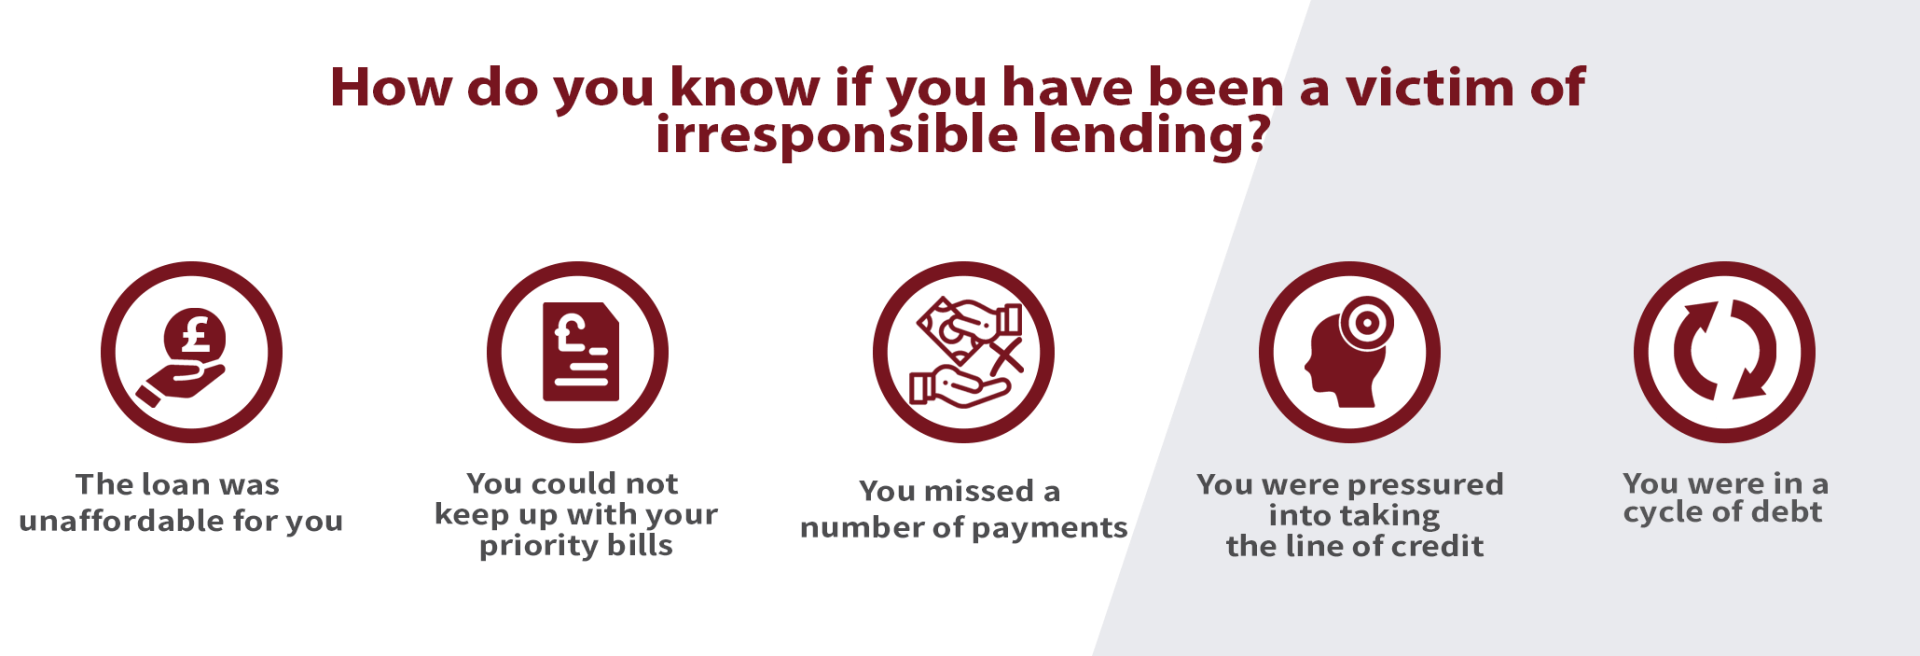 How do you know if you have been a victim of irresponsible lending ?